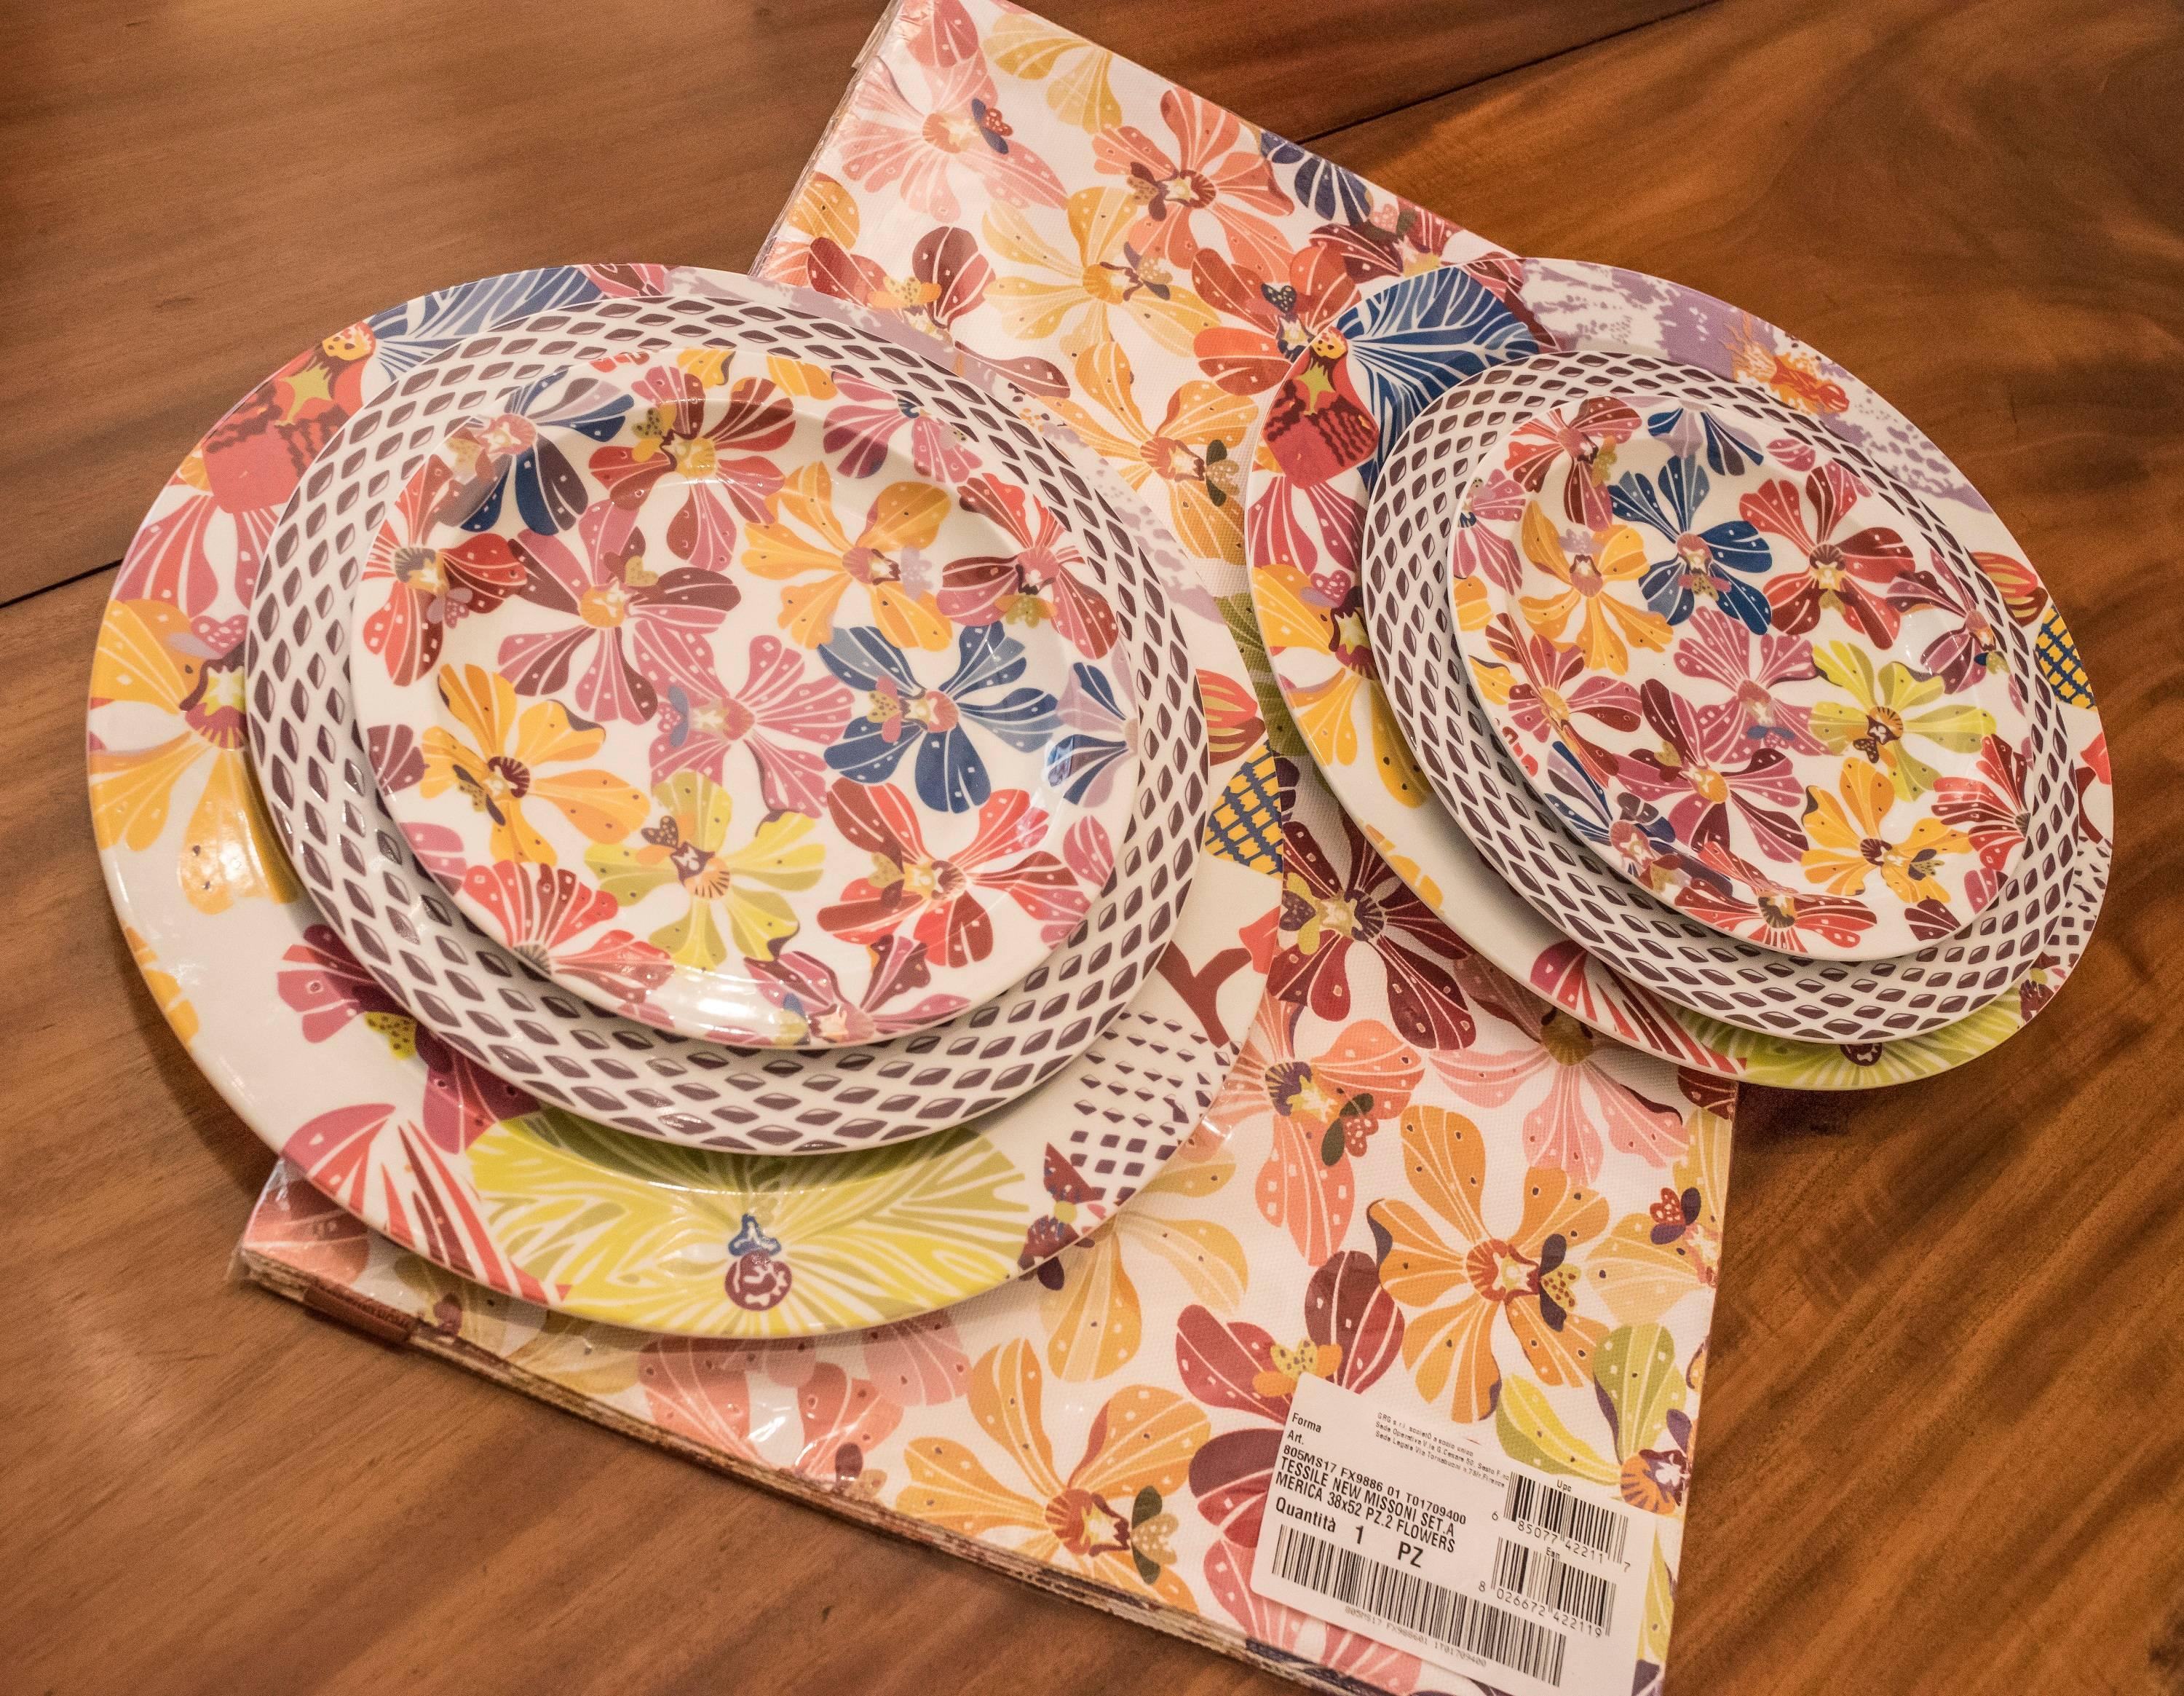 Six set of three plates in different size, with colorful flowers and geometric patterns.
Each set have a cloth tablecloth with flowers, design of Richard Ginori for Missoni Italy.
It comes from a private collection.